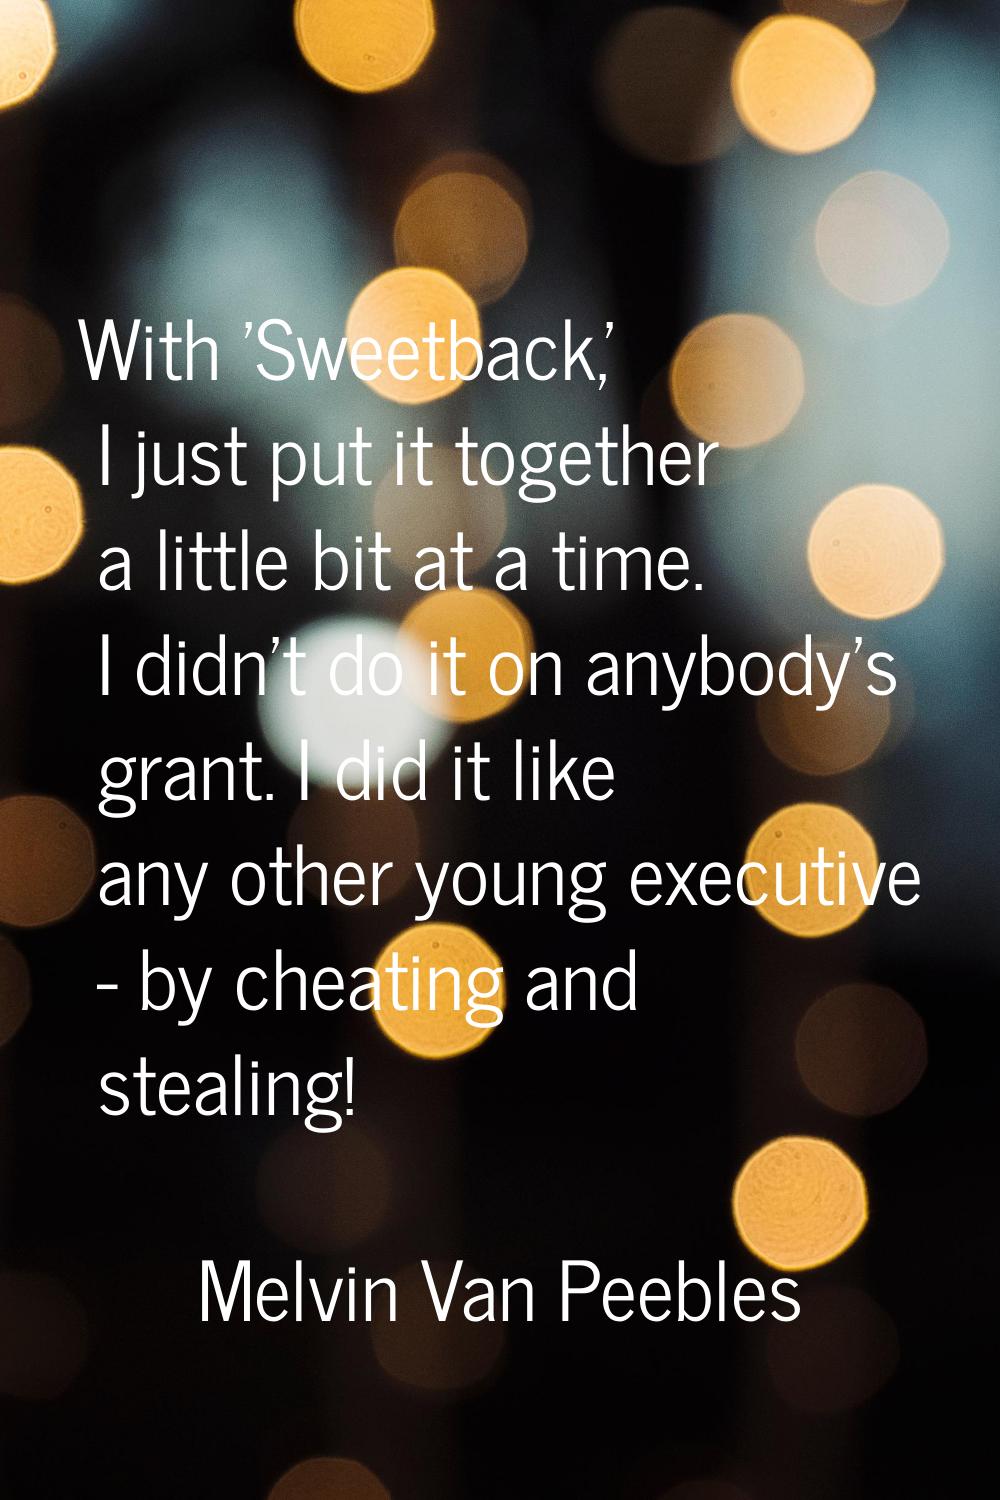 With 'Sweetback,' I just put it together a little bit at a time. I didn't do it on anybody's grant.